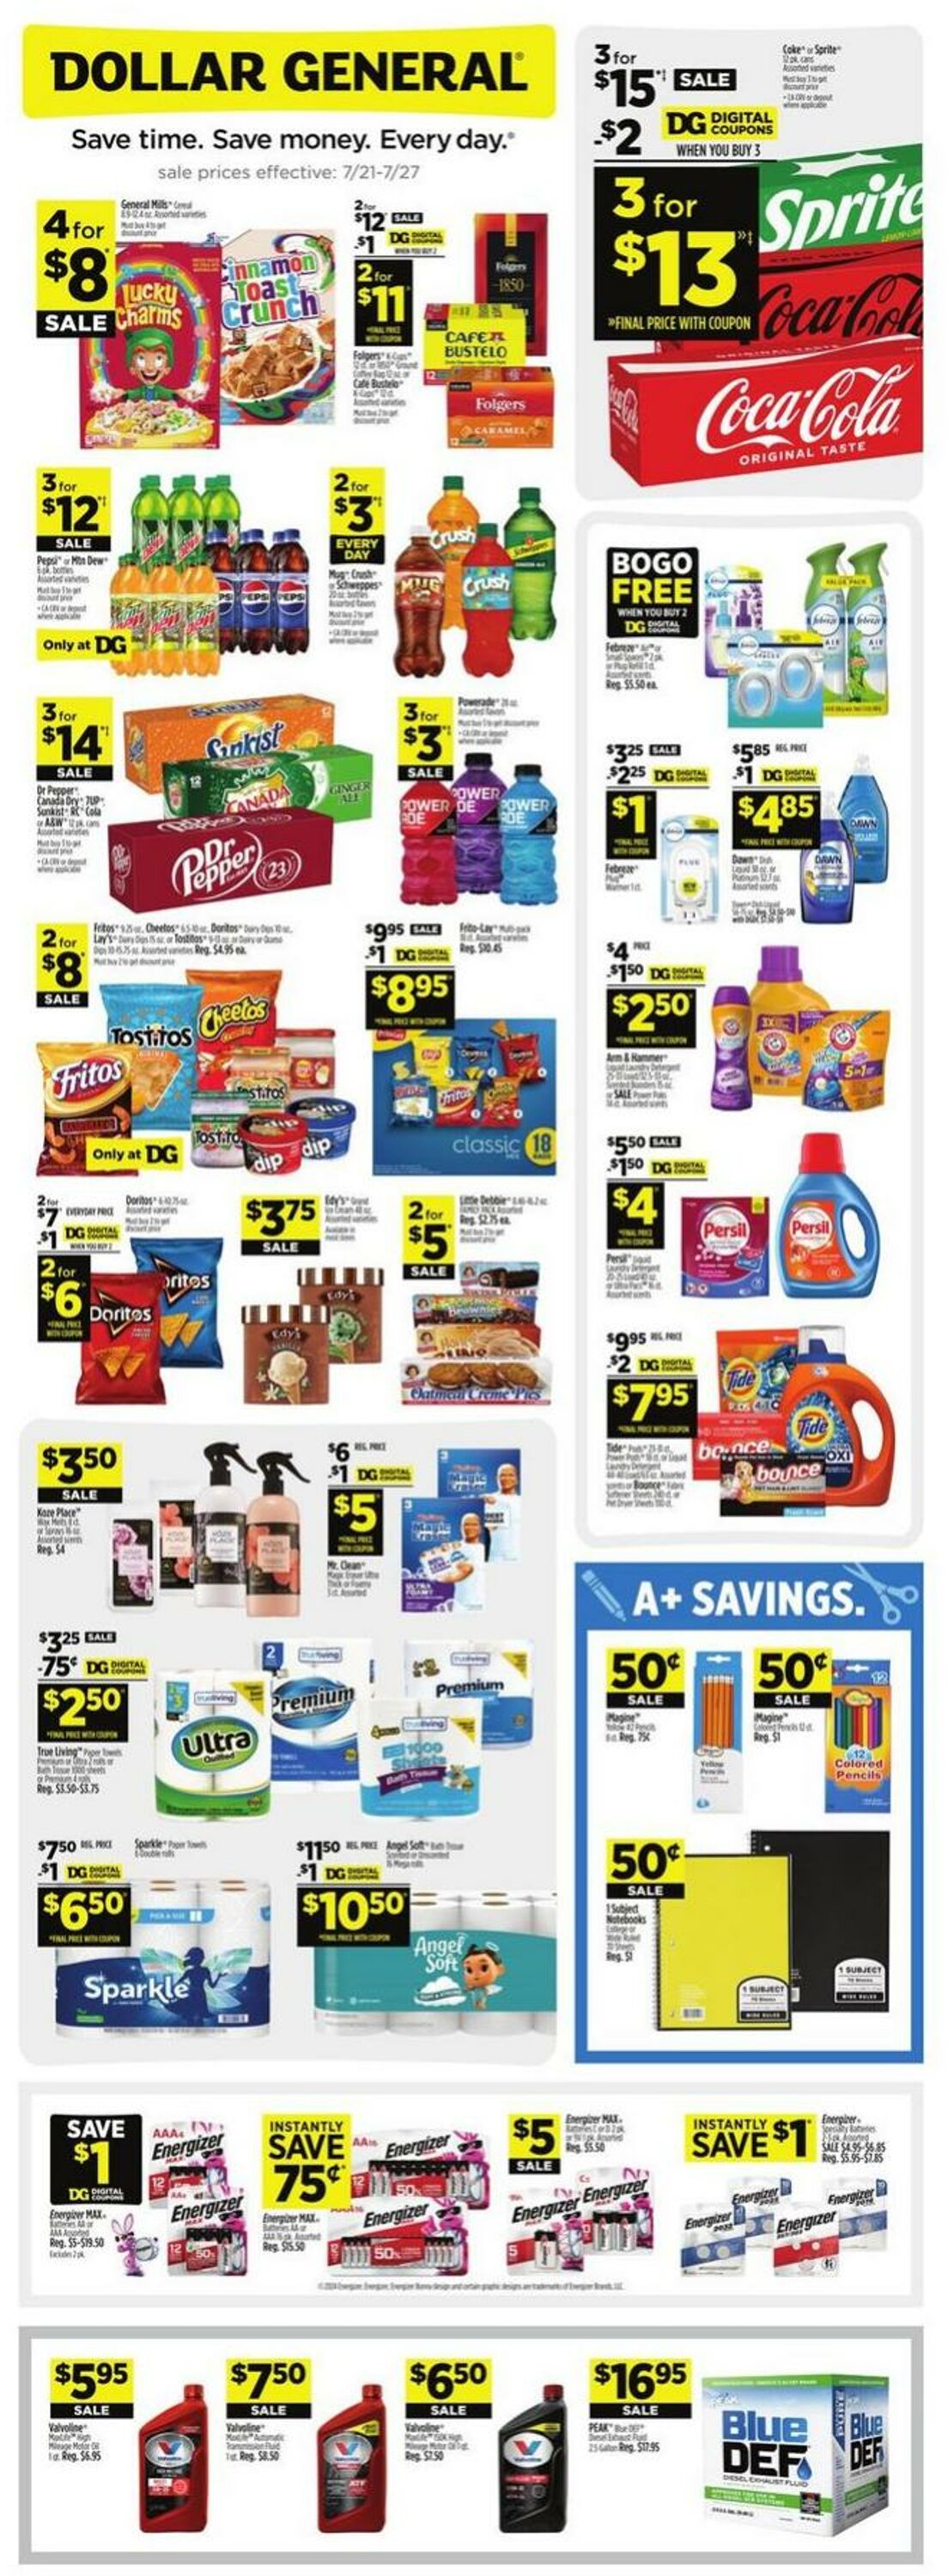 Dollar General Promotional weekly ads